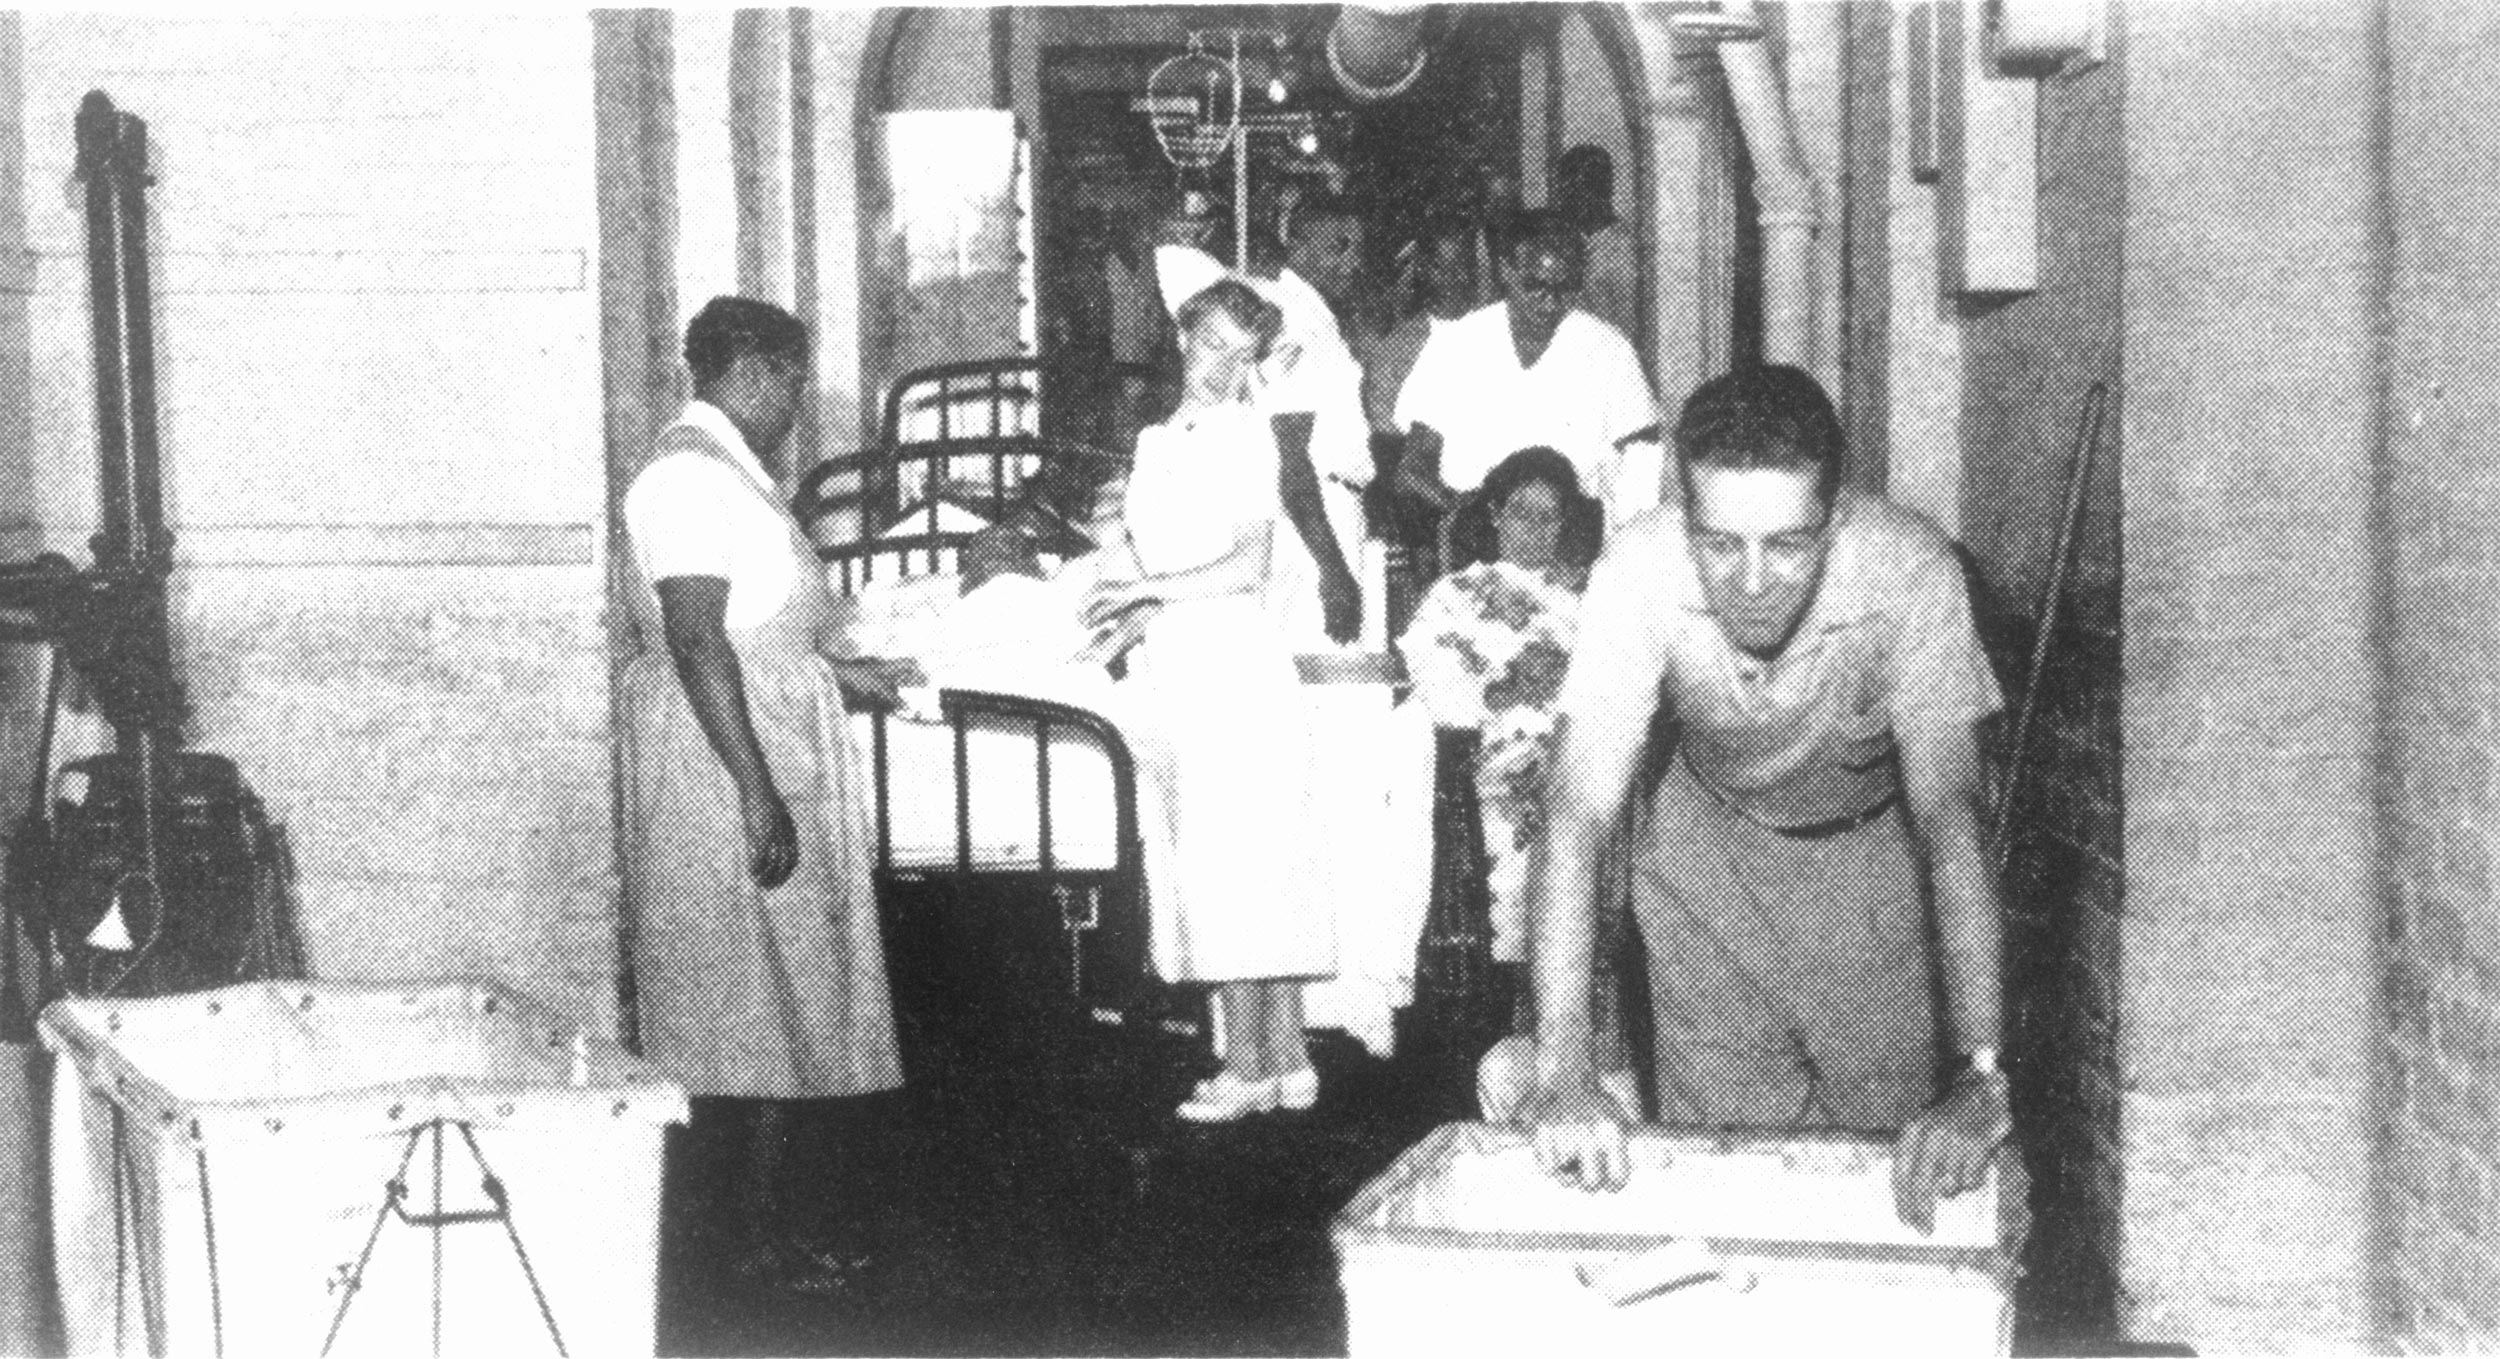 Black and White photo of hospital workers and patients in a hallway